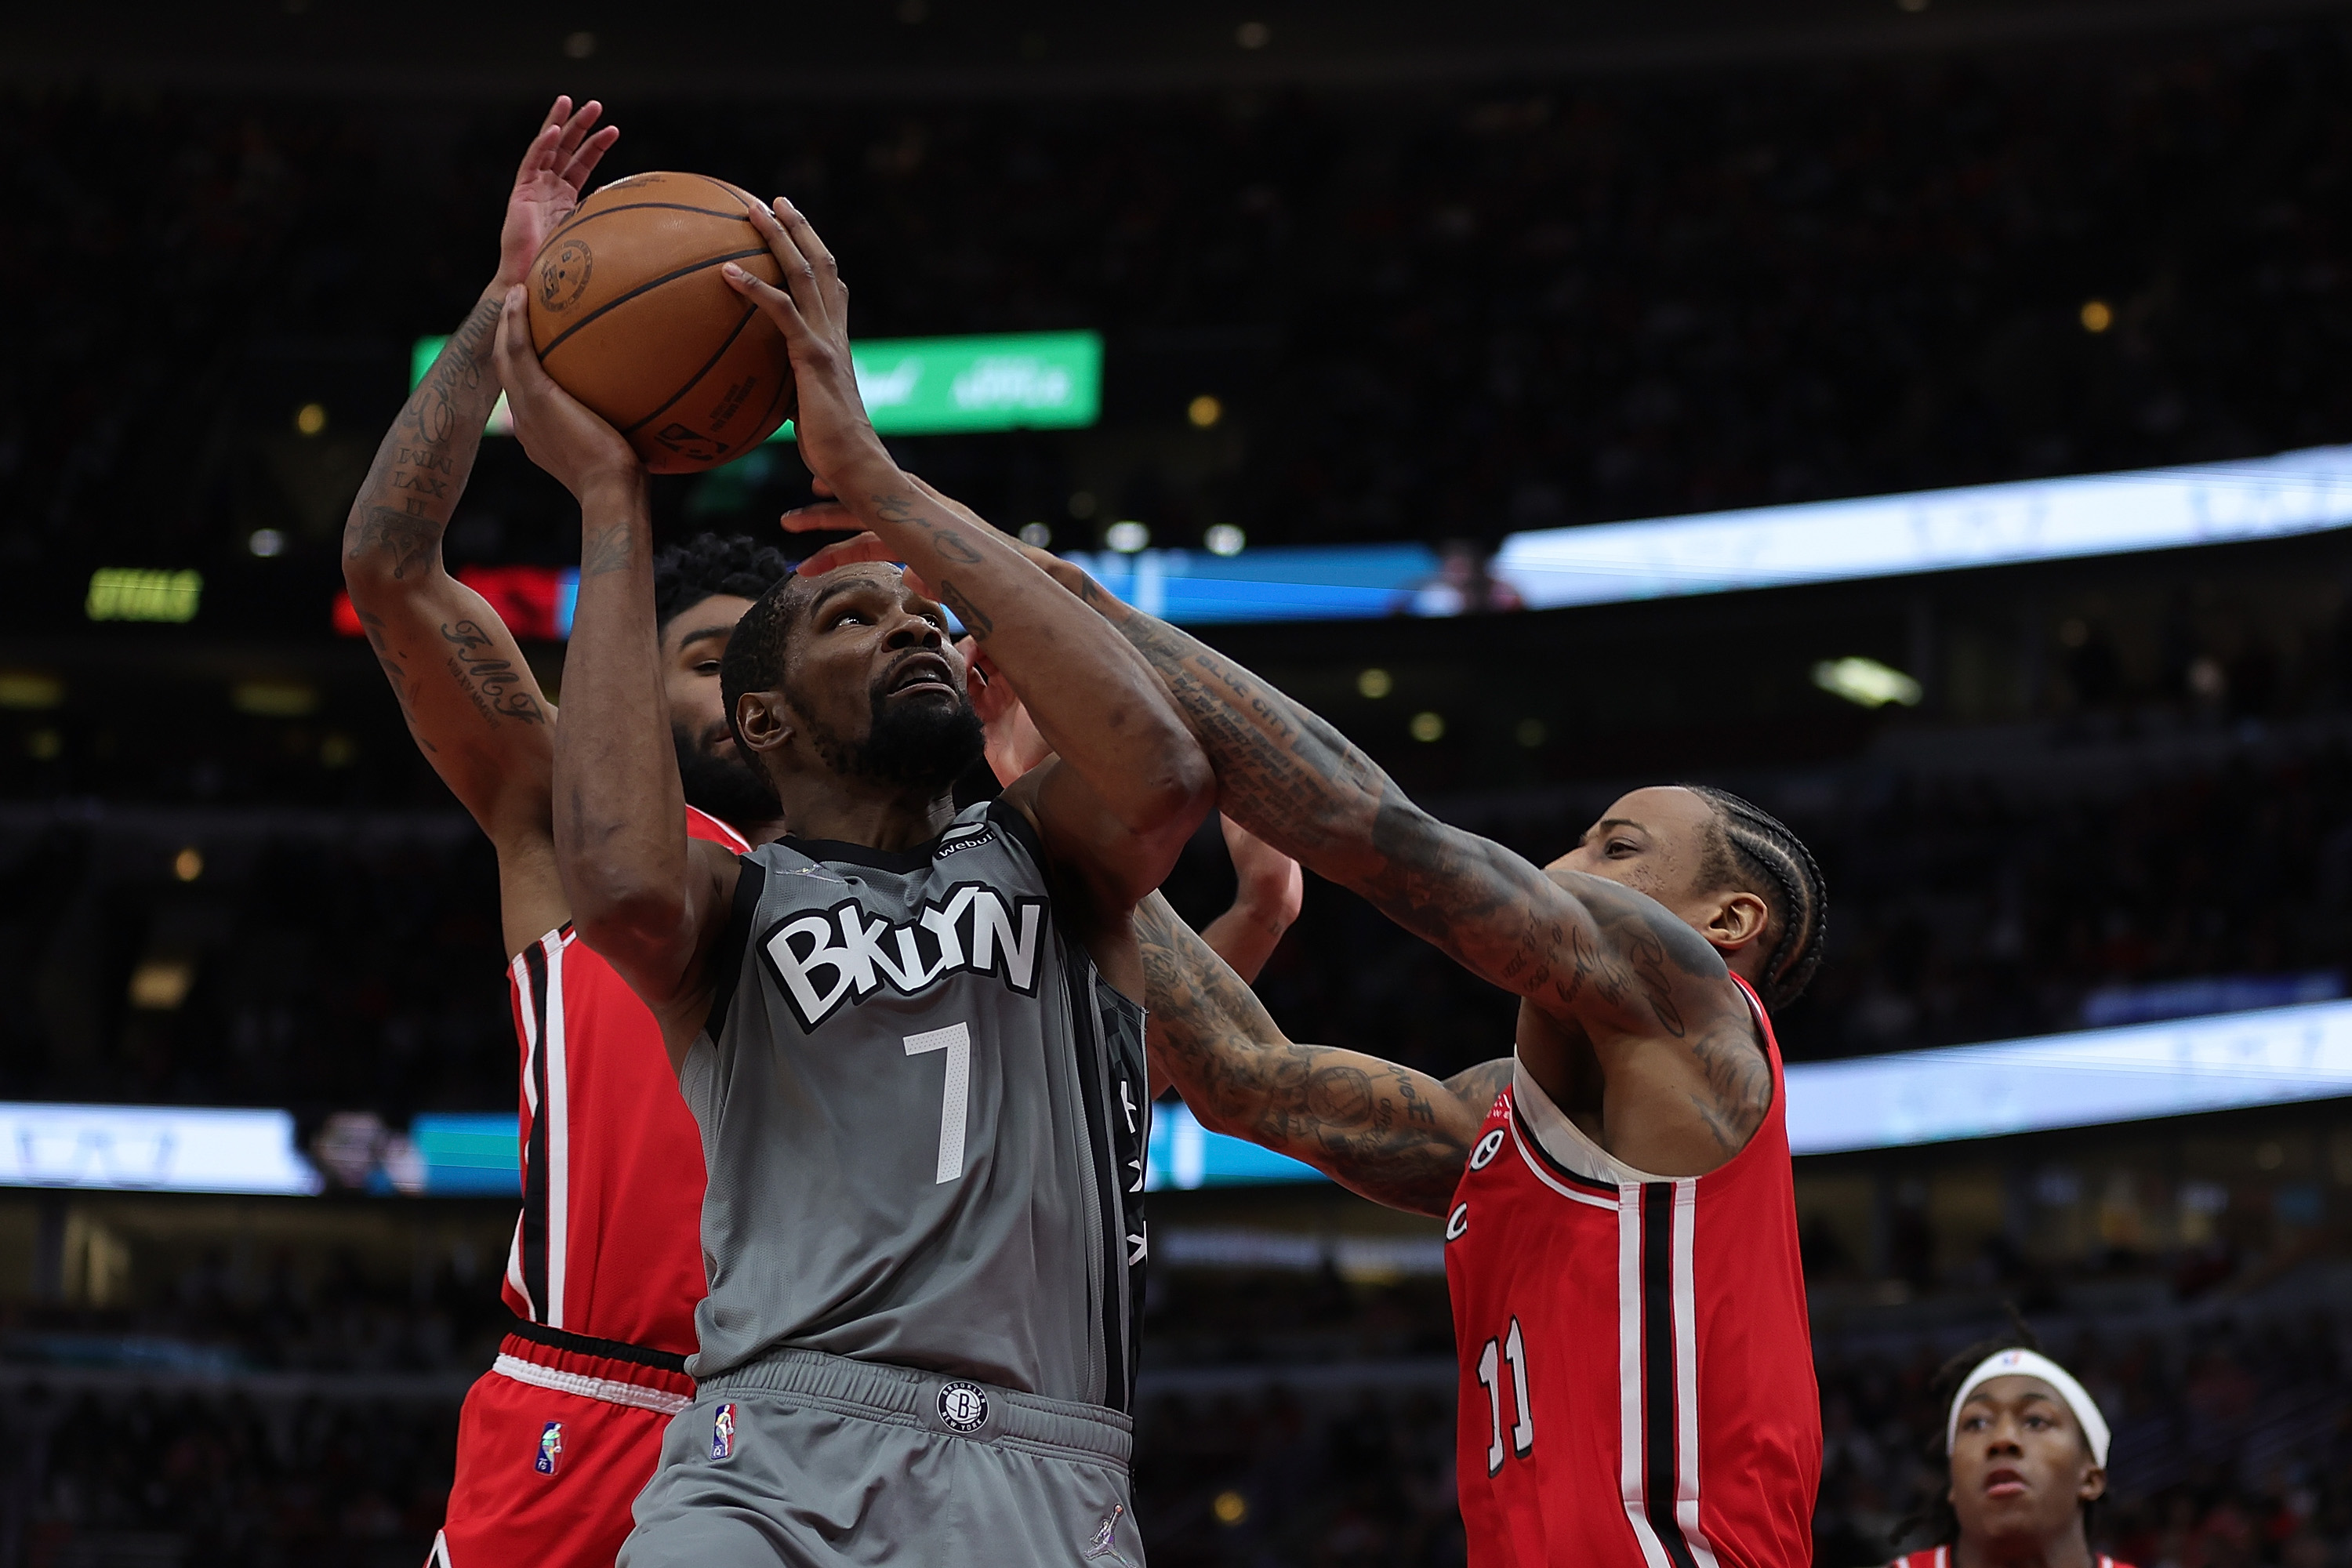 Brooklyn Nets star Kevin Durant drives to the basket during a game against the Chicago Bulls